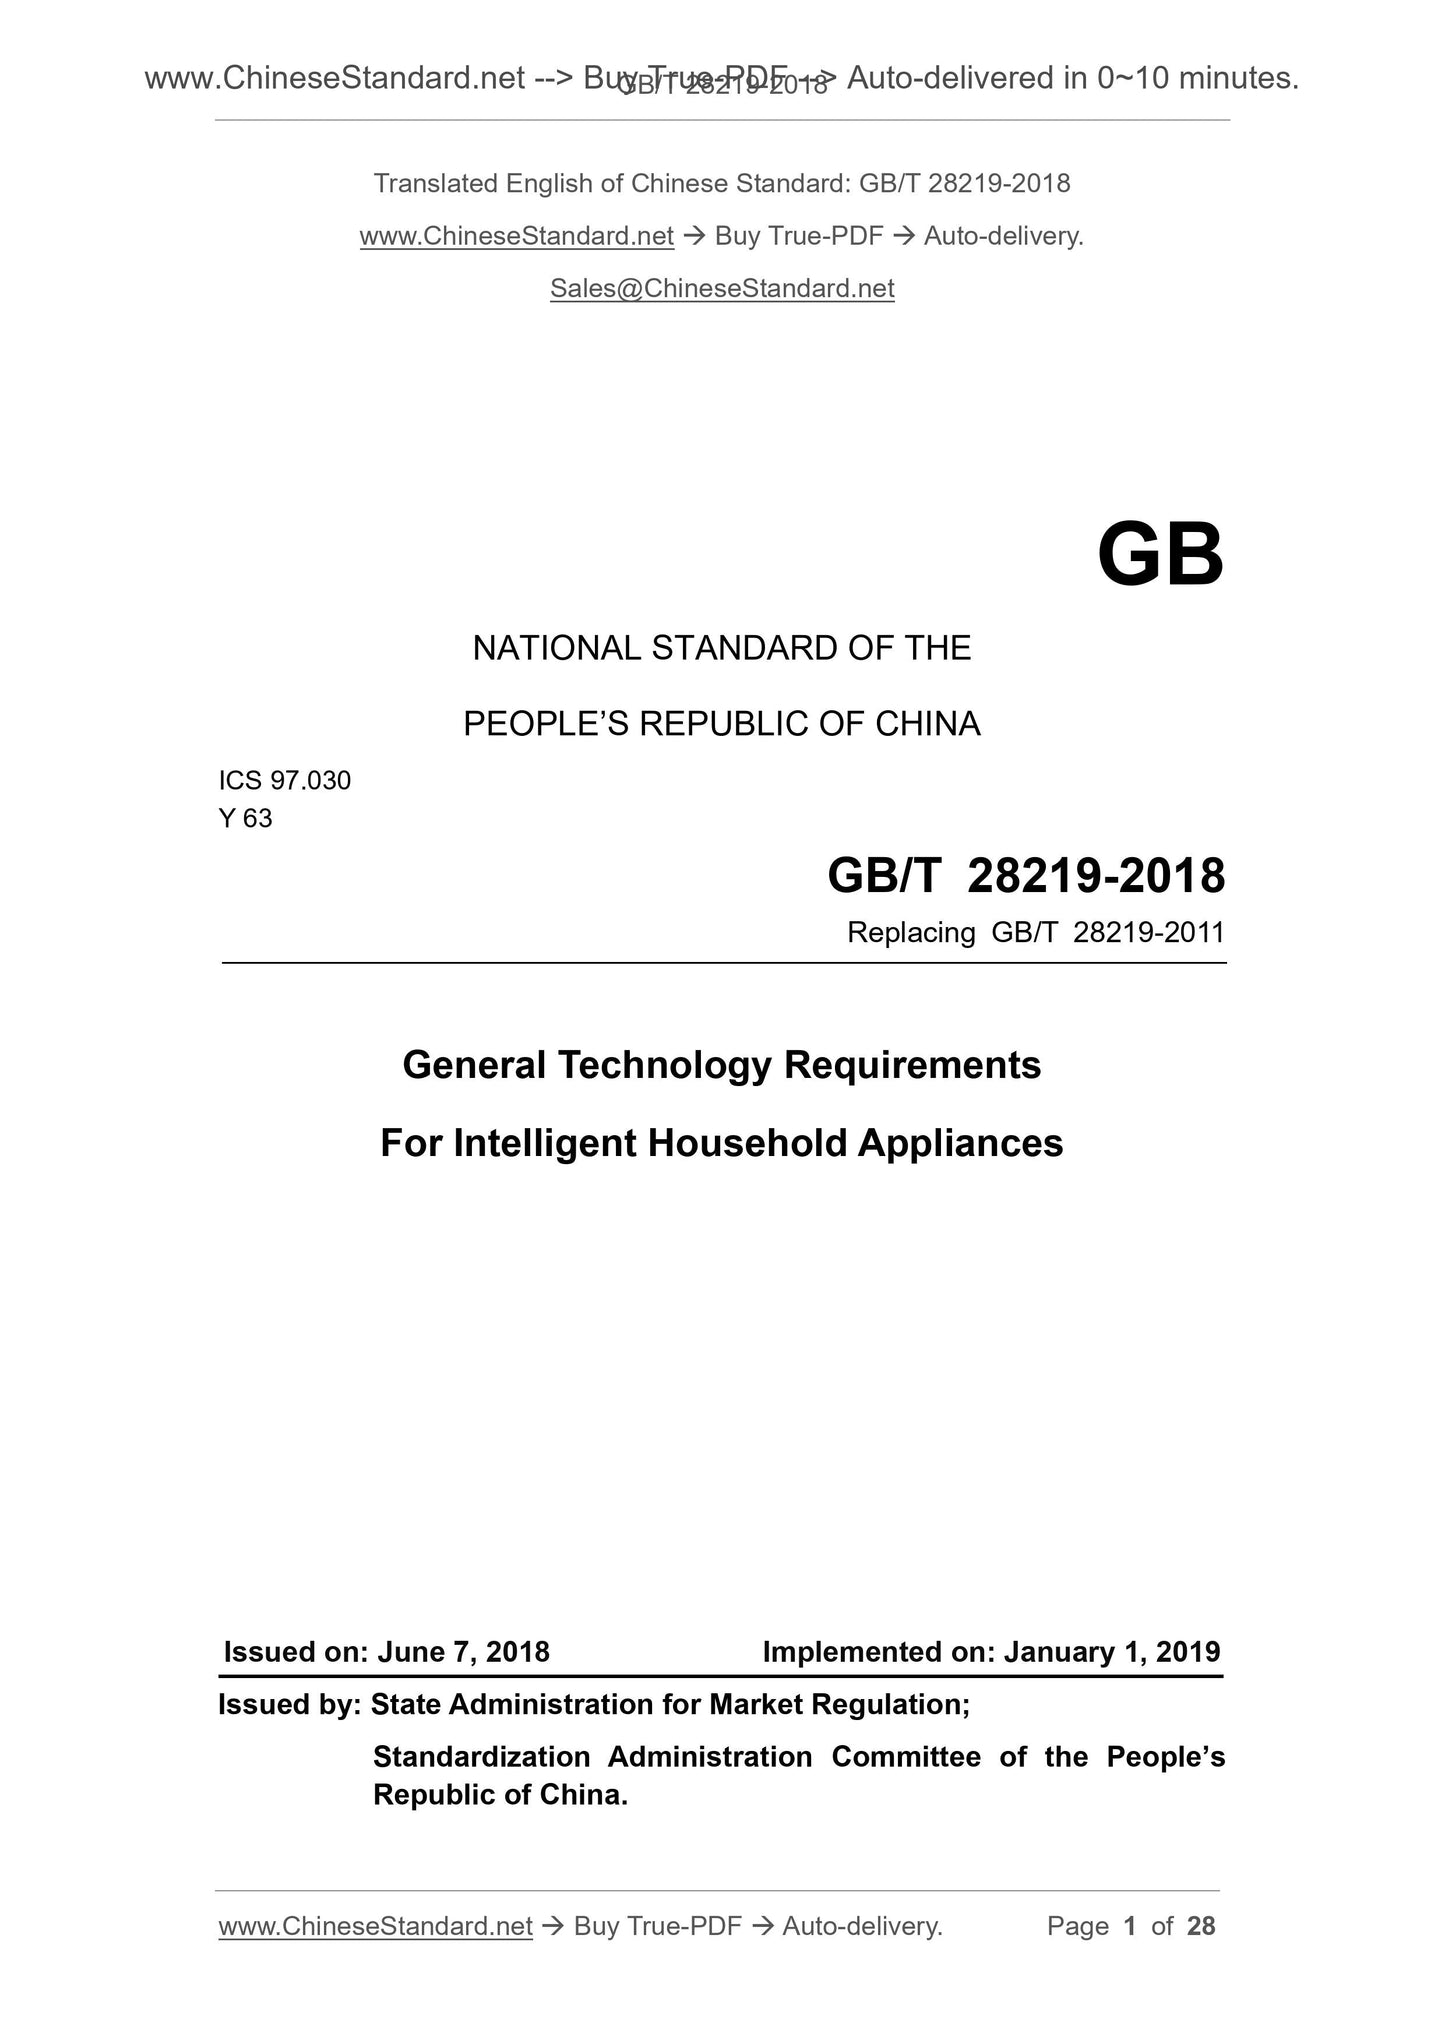 GB/T 28219-2018 Page 1